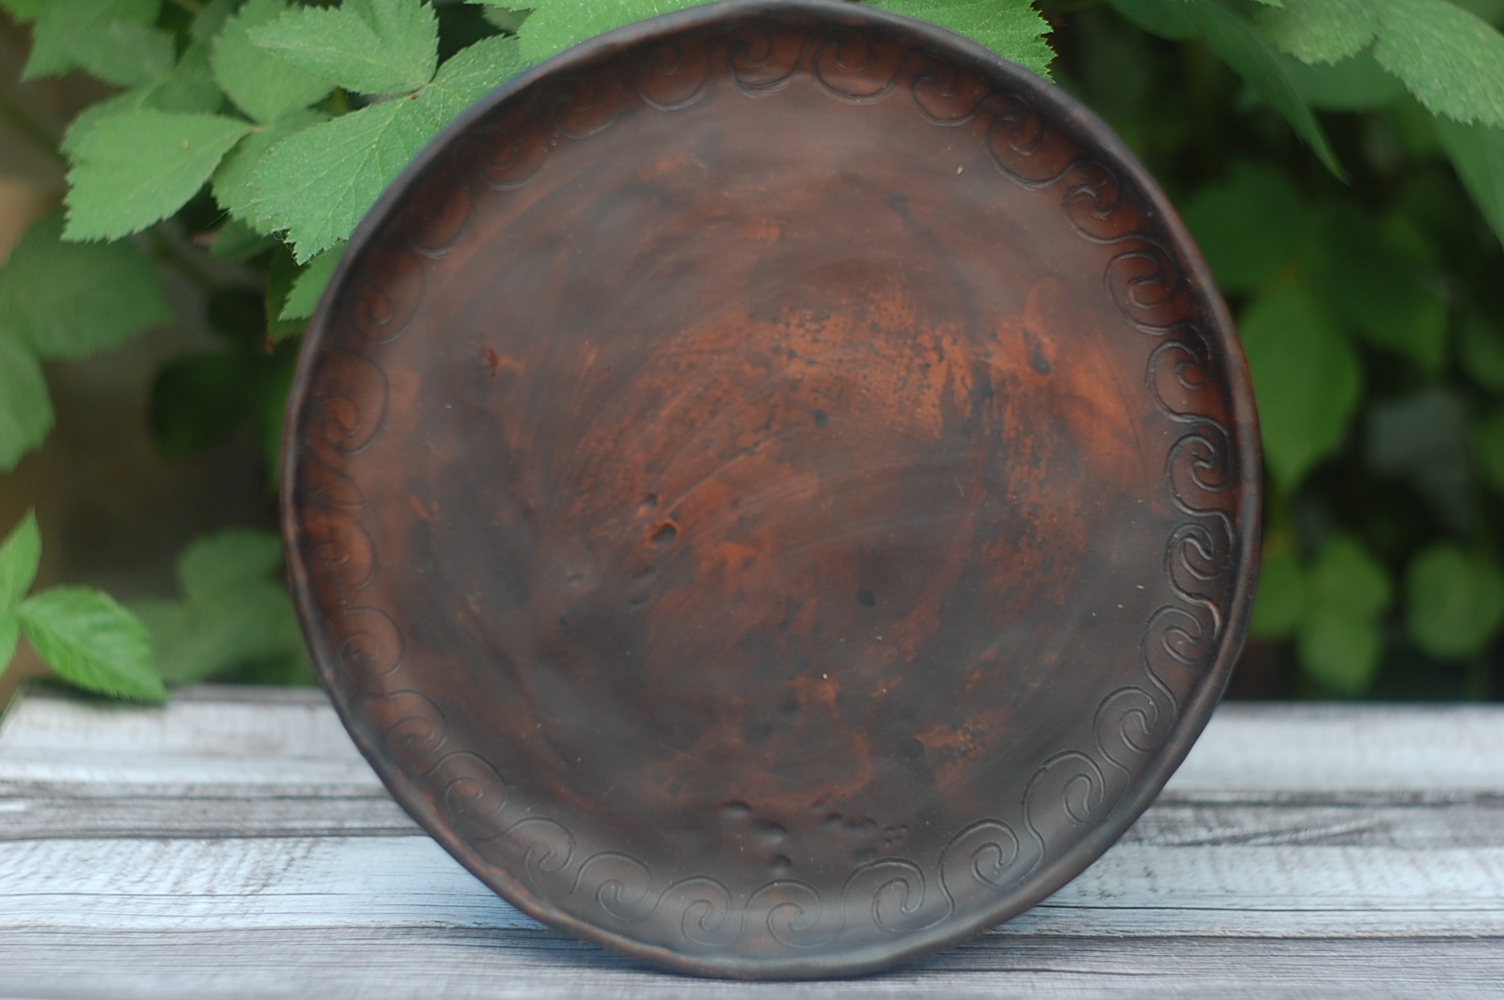 Infinity pottery clay plate